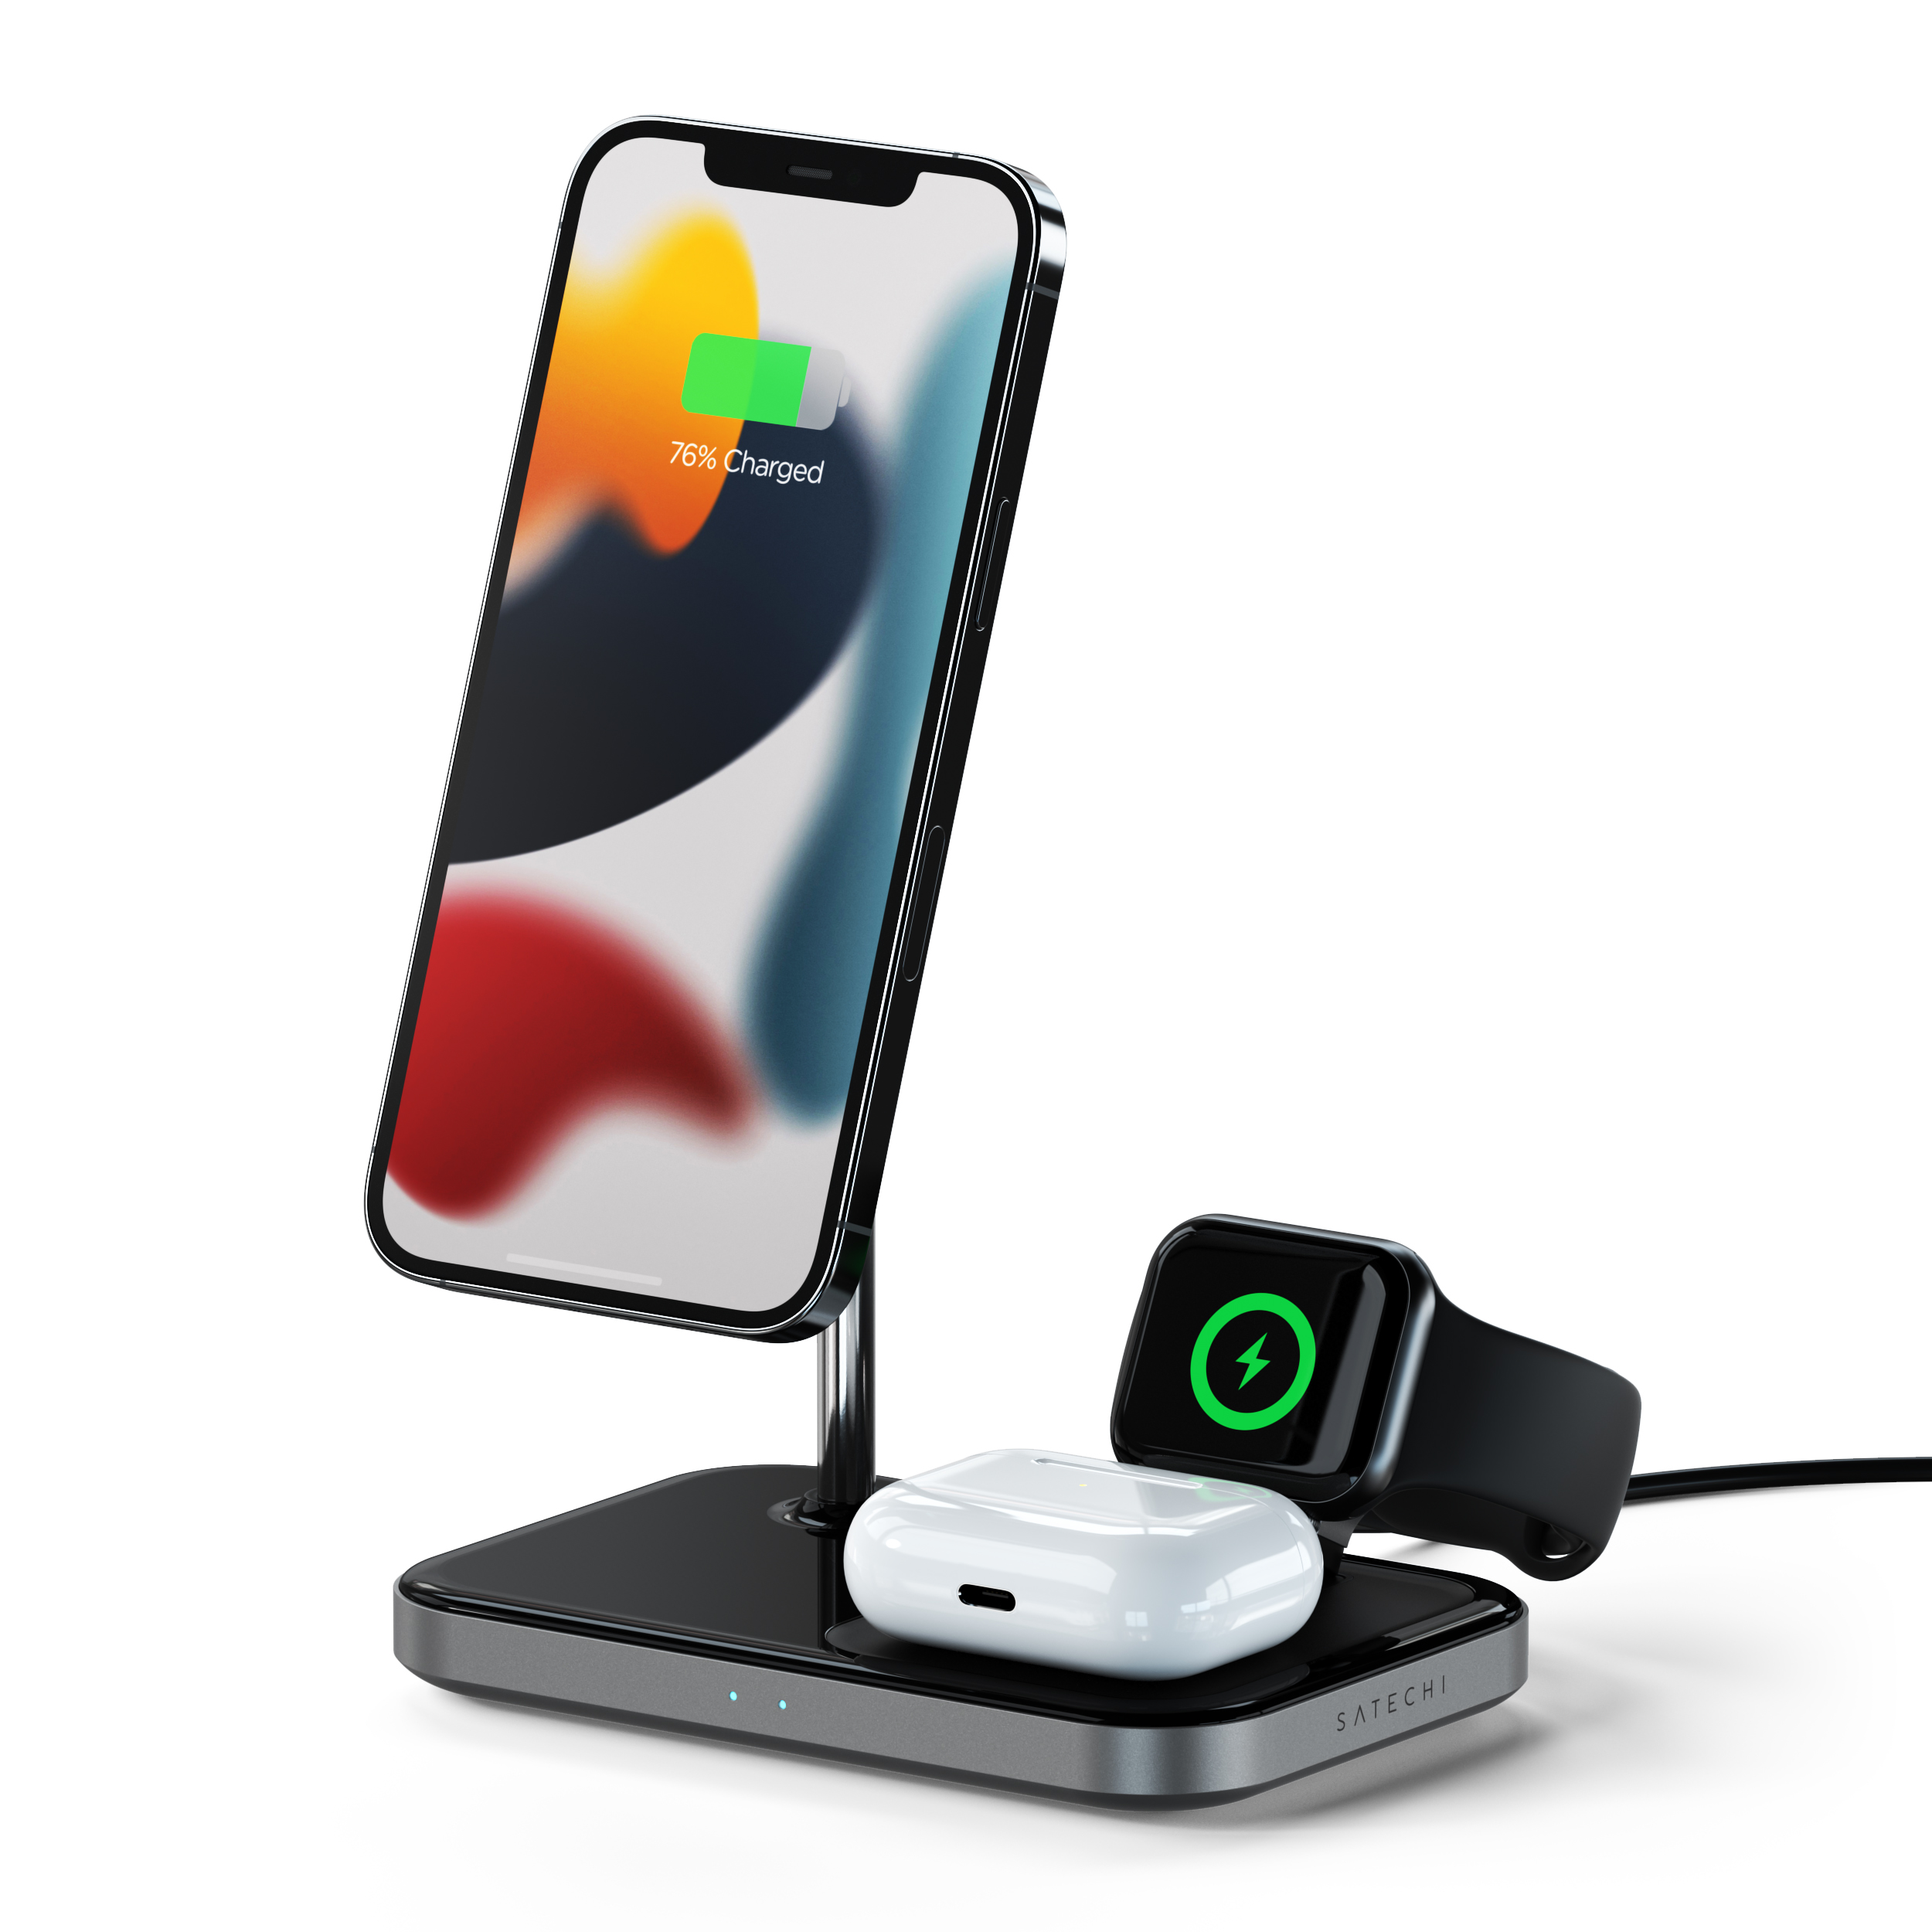 SATECHI 3-in-1 Magnetic Charging Stand Wireless Wireless Charger Satechi, Nero